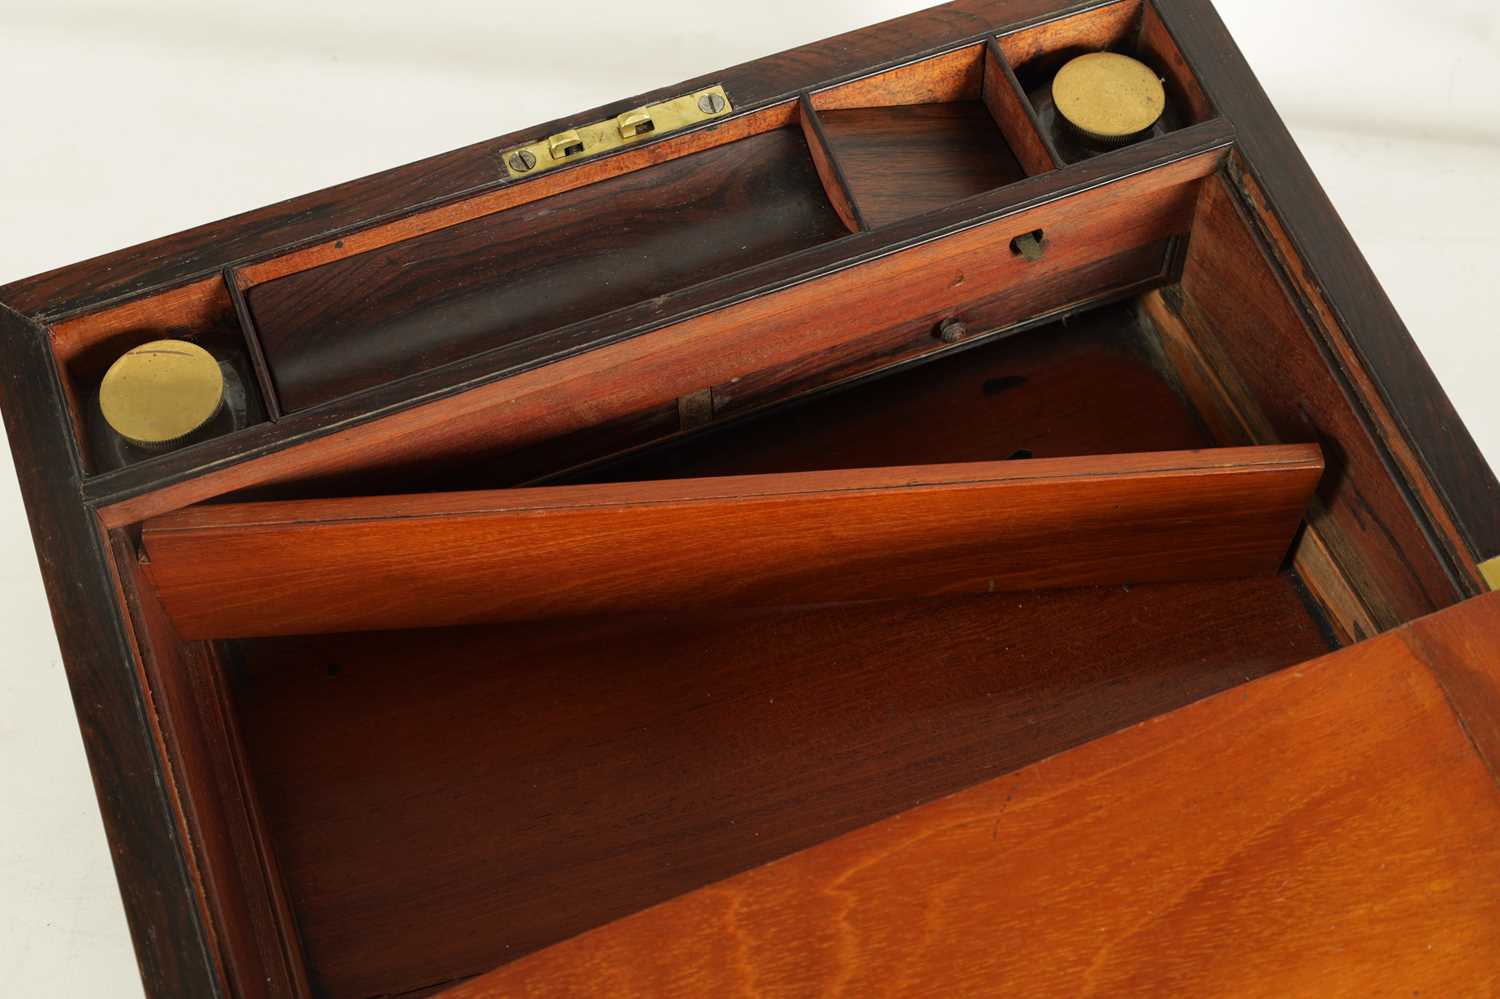 TWO MID 19TH CENTURY ROSEWOOD AND MOTHER-OF-PEARL INLAID WRITING BOXES - Image 9 of 14